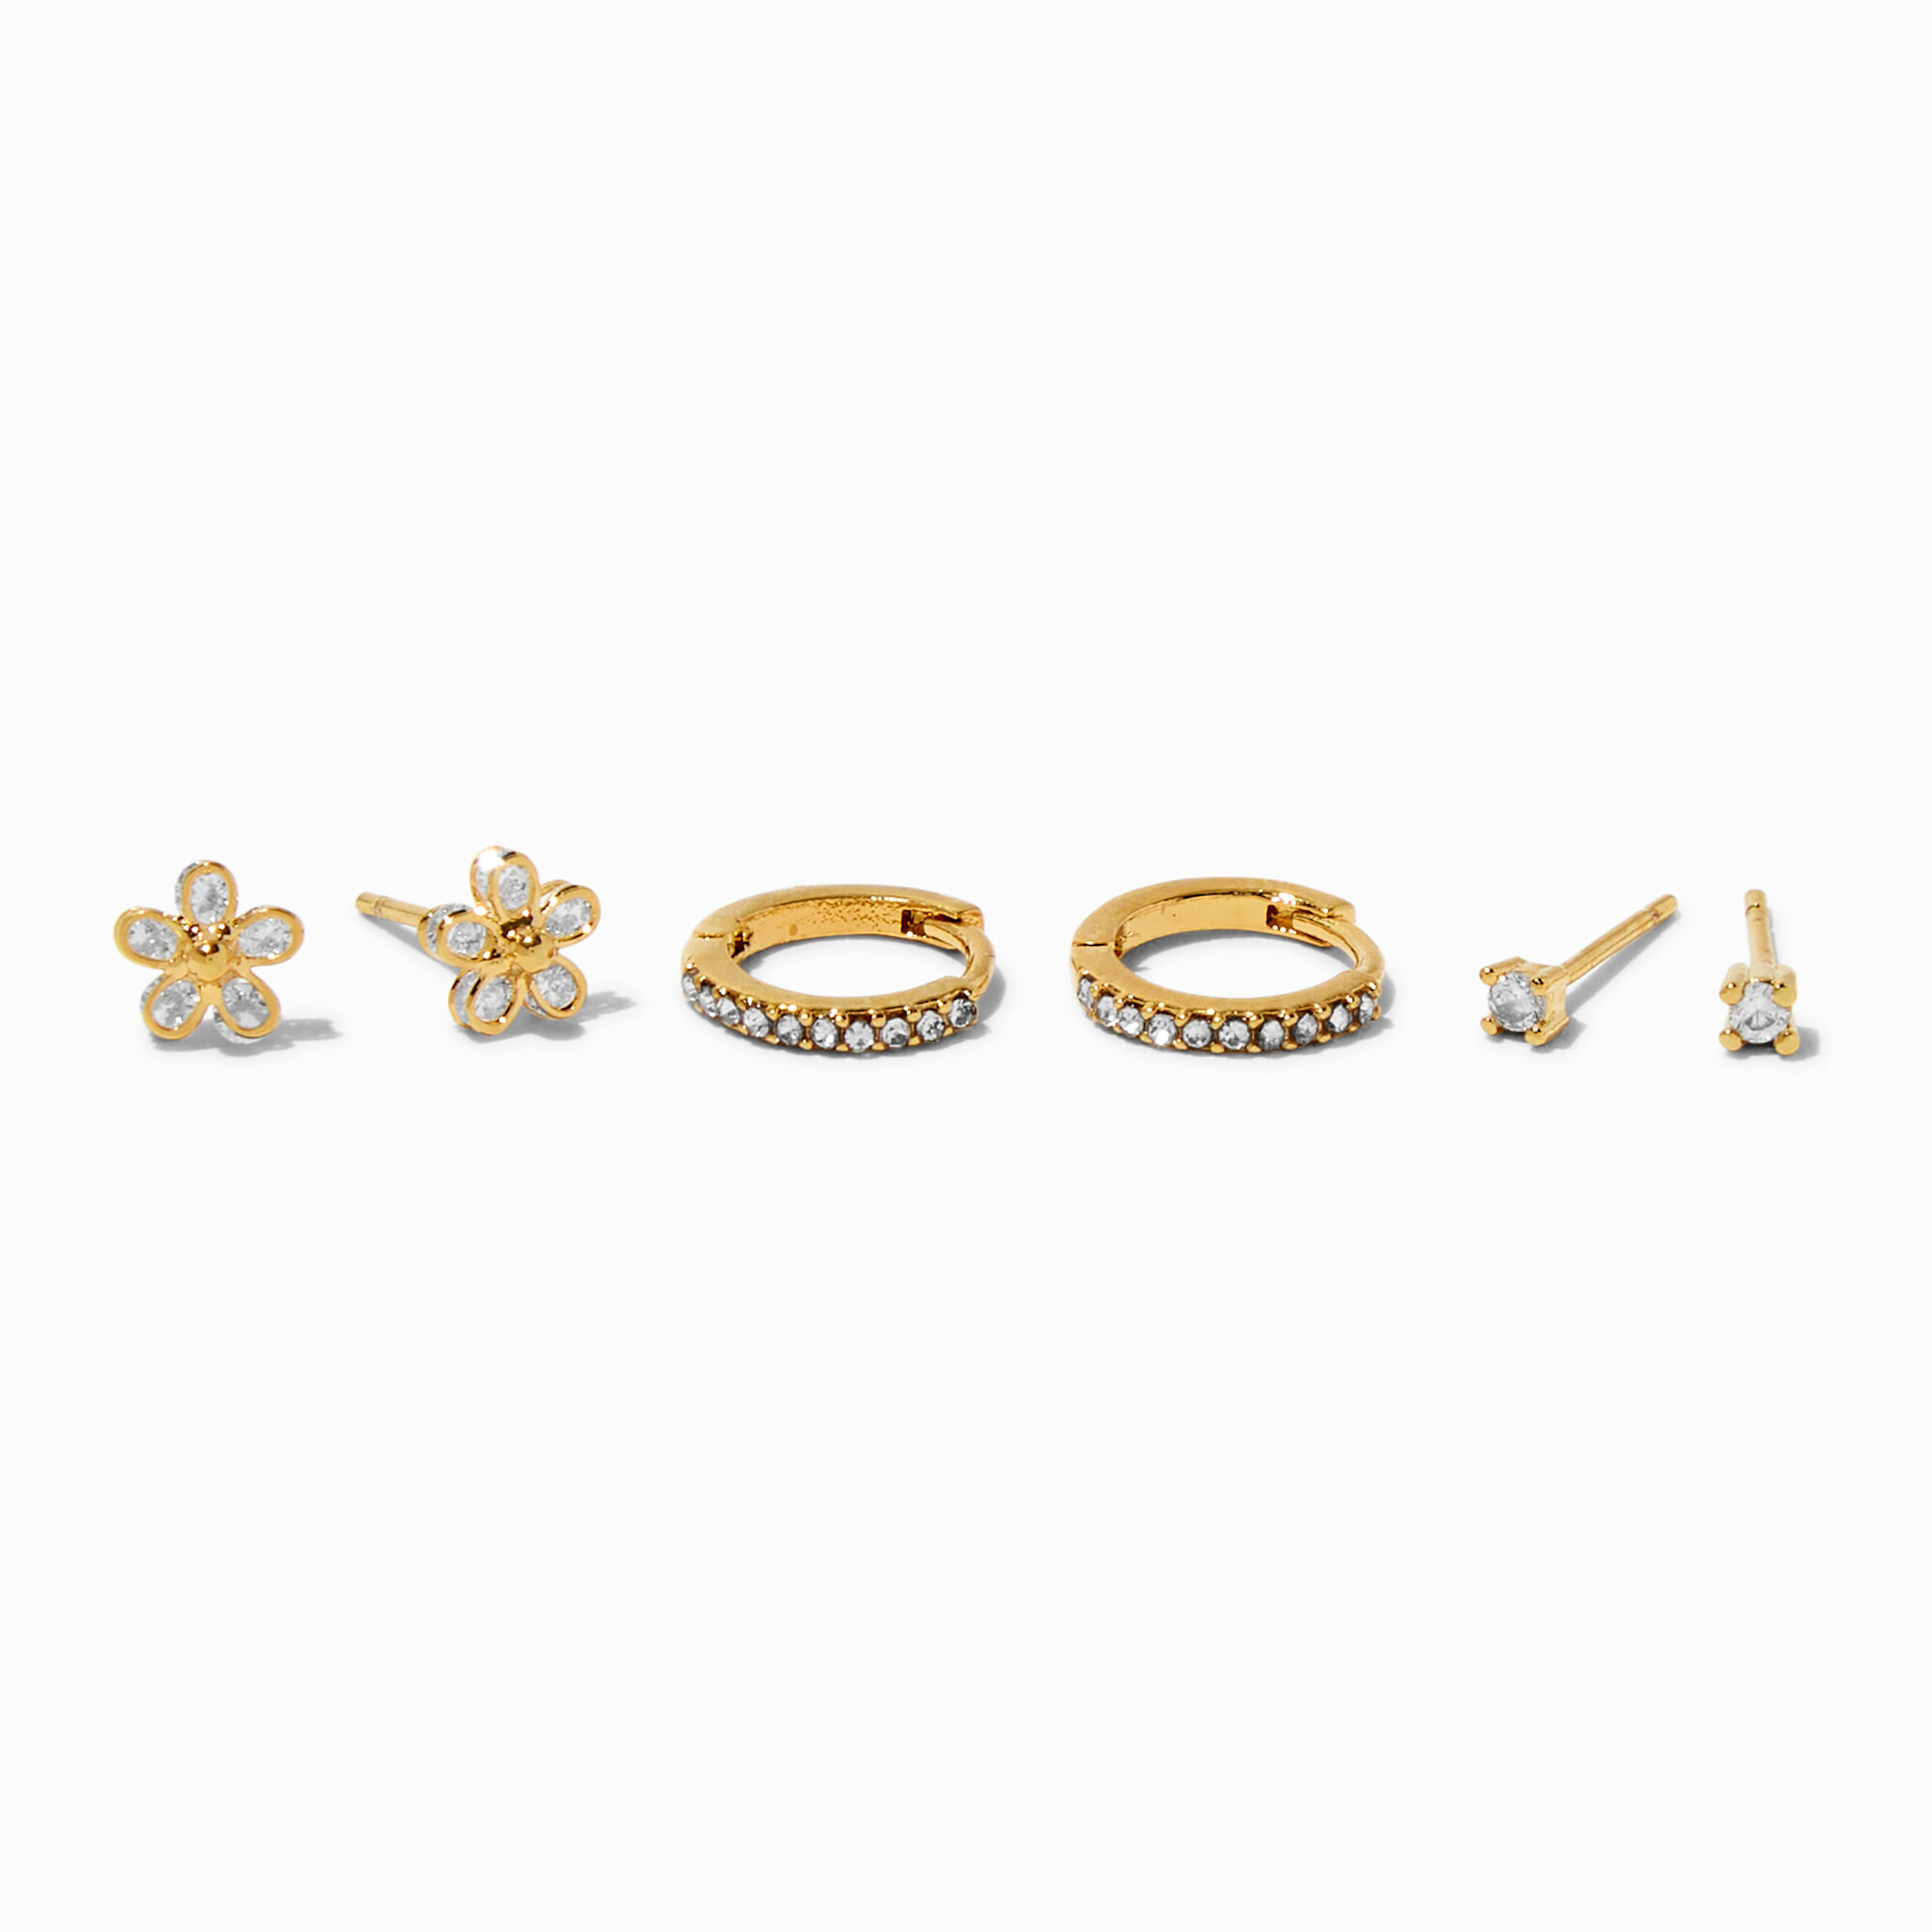 View C Luxe By Claires 18K Gold Plated Cubic Zirconia Flower Studs Hoop Earrings 3 Pack Yellow information